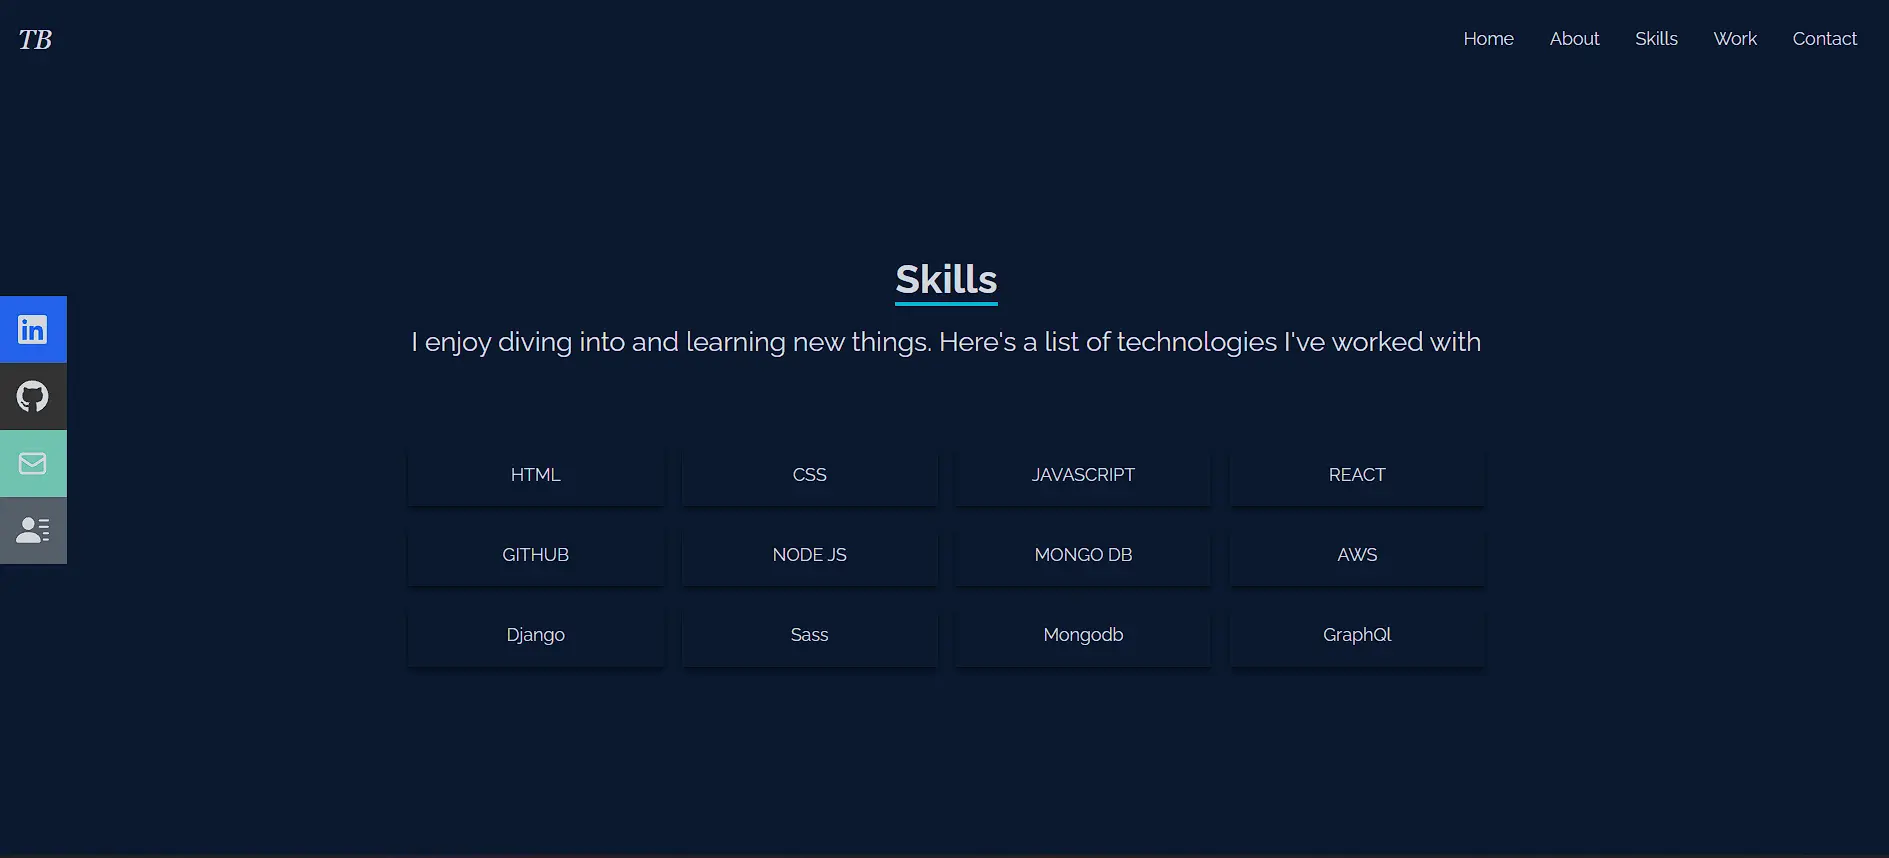 Rendered skills section 